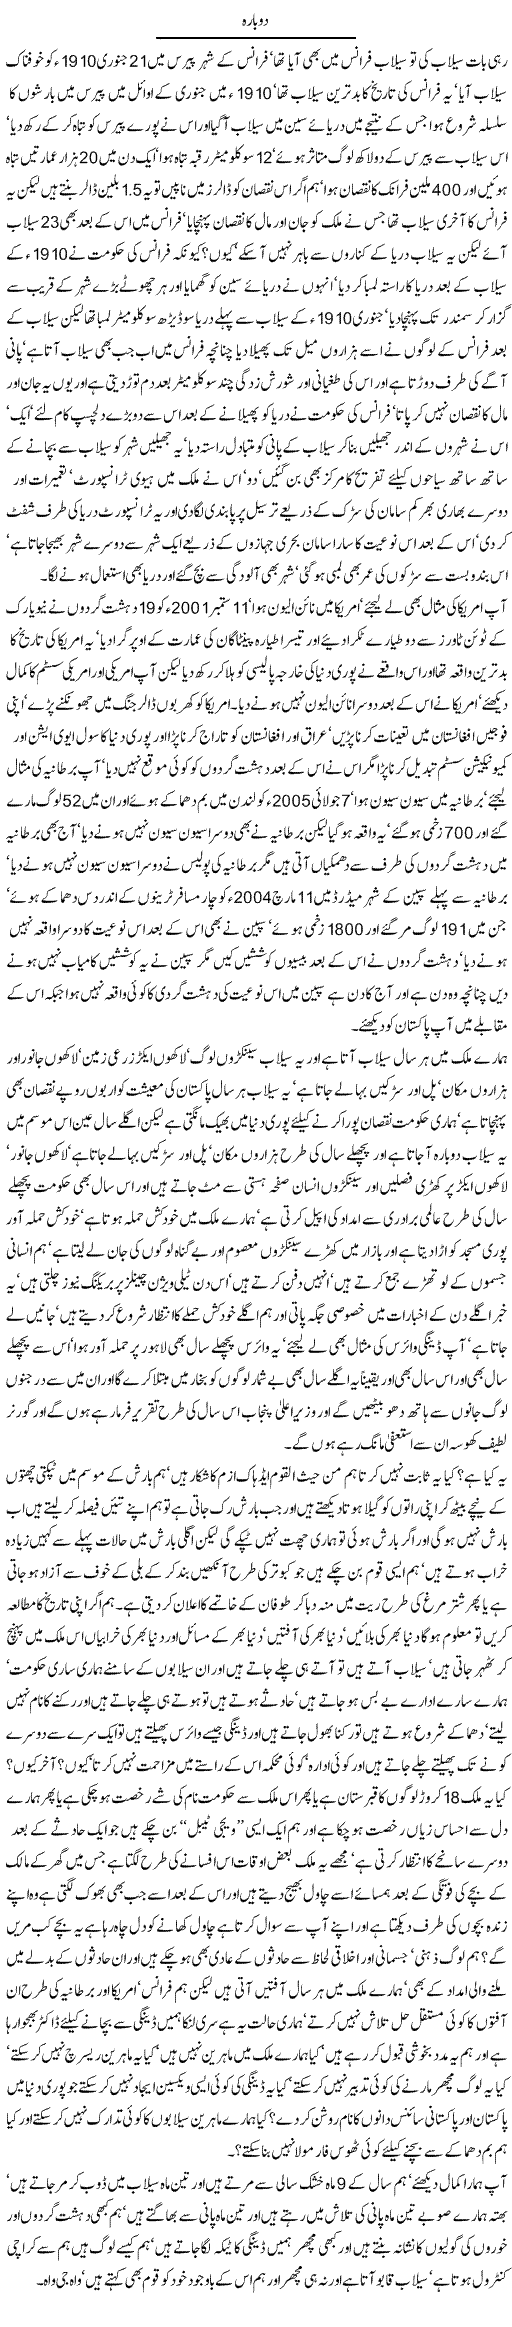 Another Flood Express Column Javed Chaudhry 13 September 2011